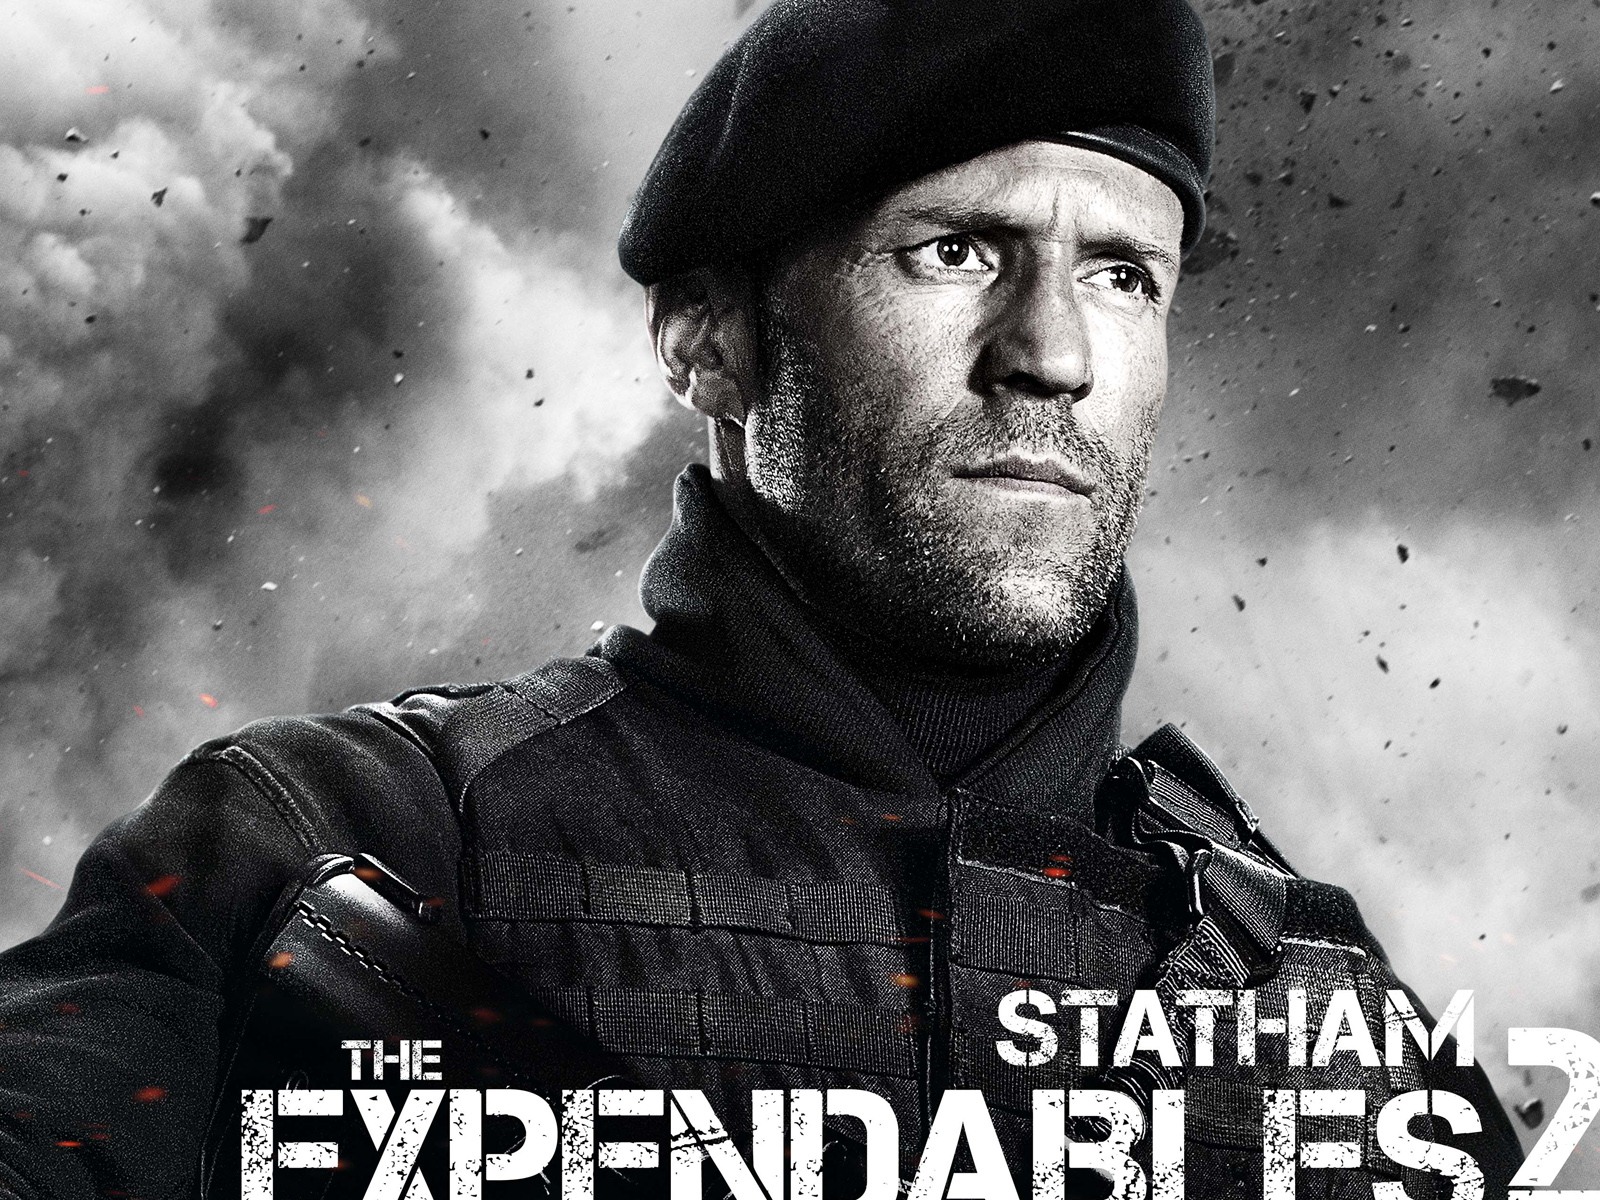 2012 Expendables2 HDの壁紙 #5 - 1600x1200